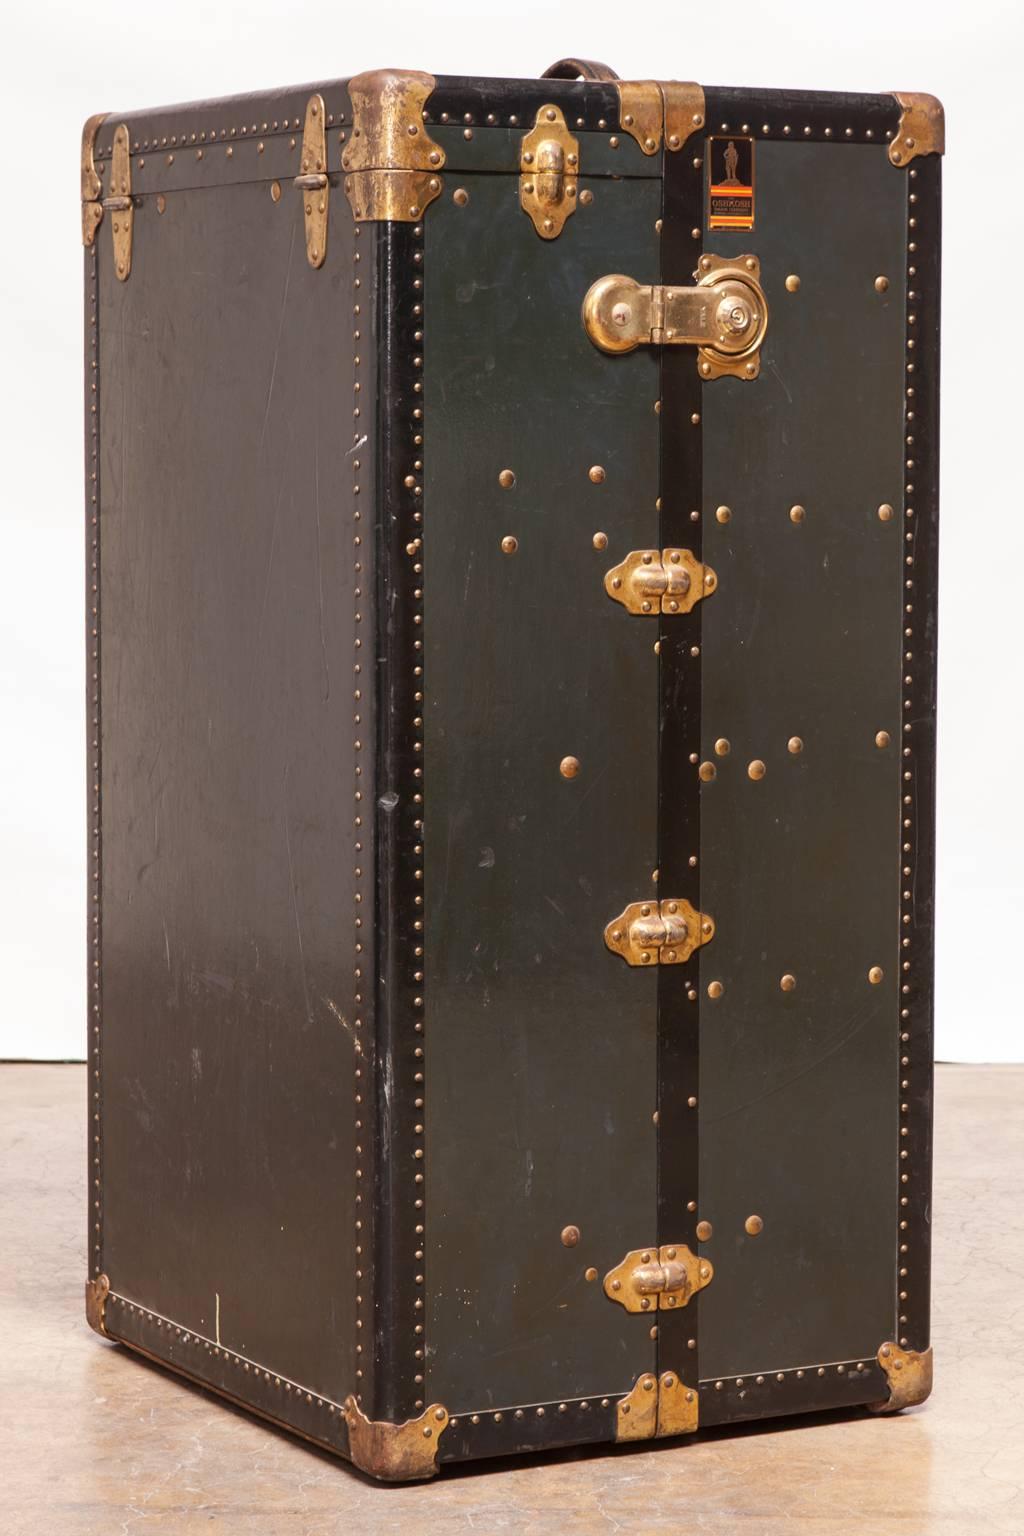 Exceptional wardrobe steamer trunk made by Oshkosh. Features a navy blue vulcanized fiber exterior with black trim and brass hardware. Excellent condition given age and use with a shiny patina. Rare investment quality trunk from one of the top five